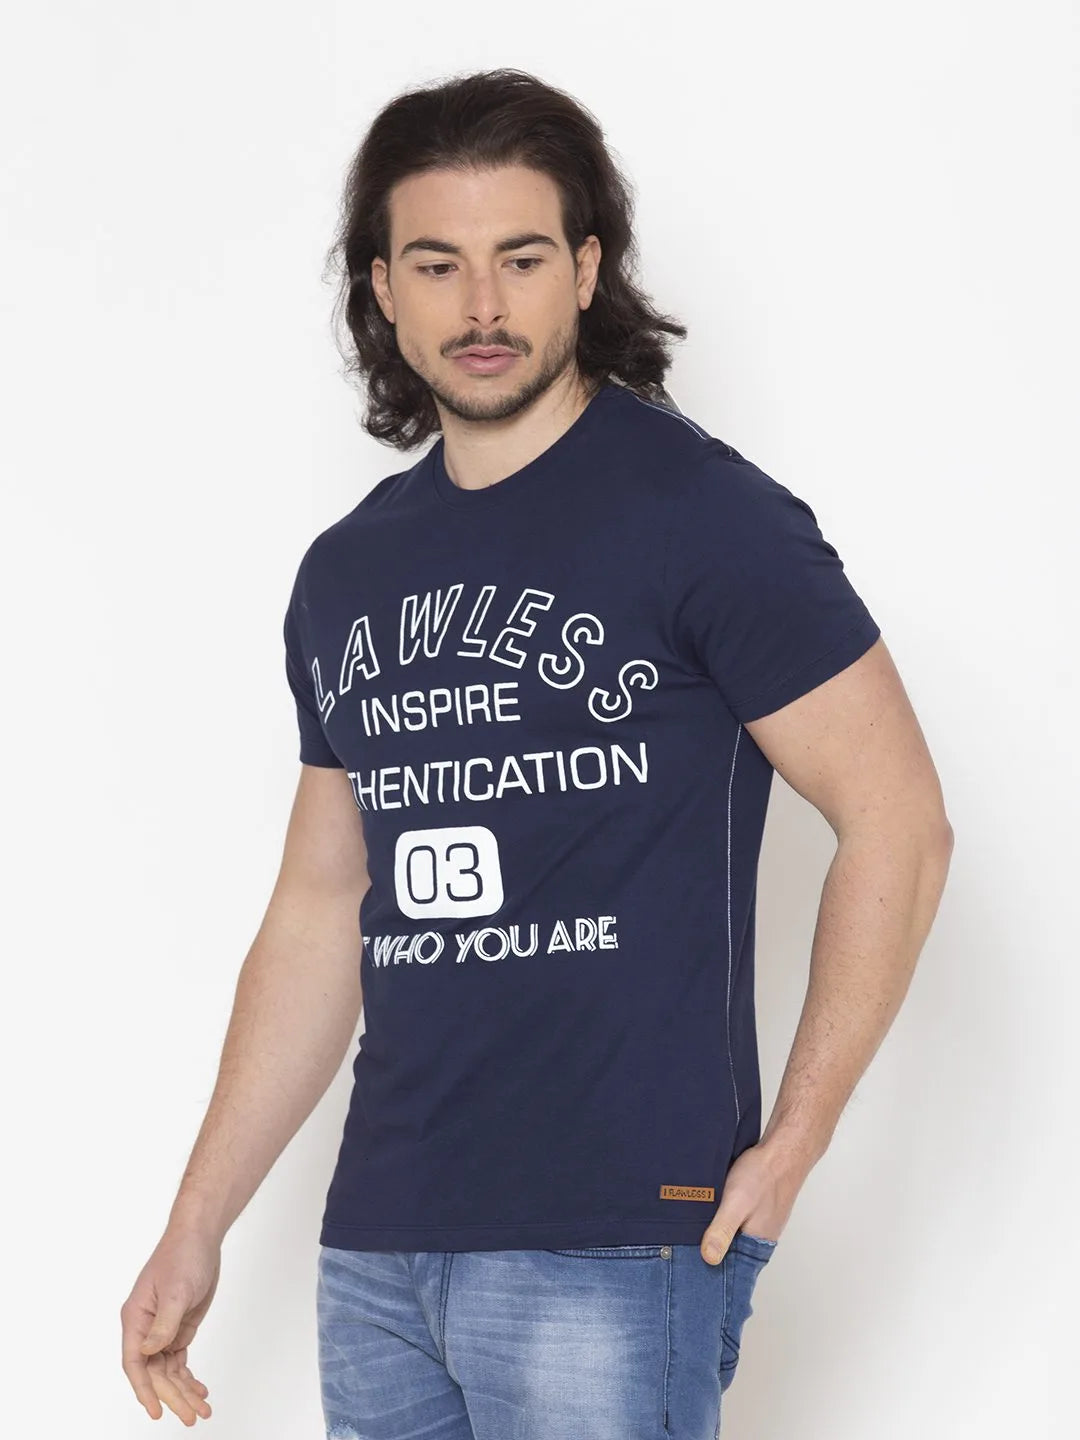 Flawless Men's Authentication Cotton T-shirt Being Flawless